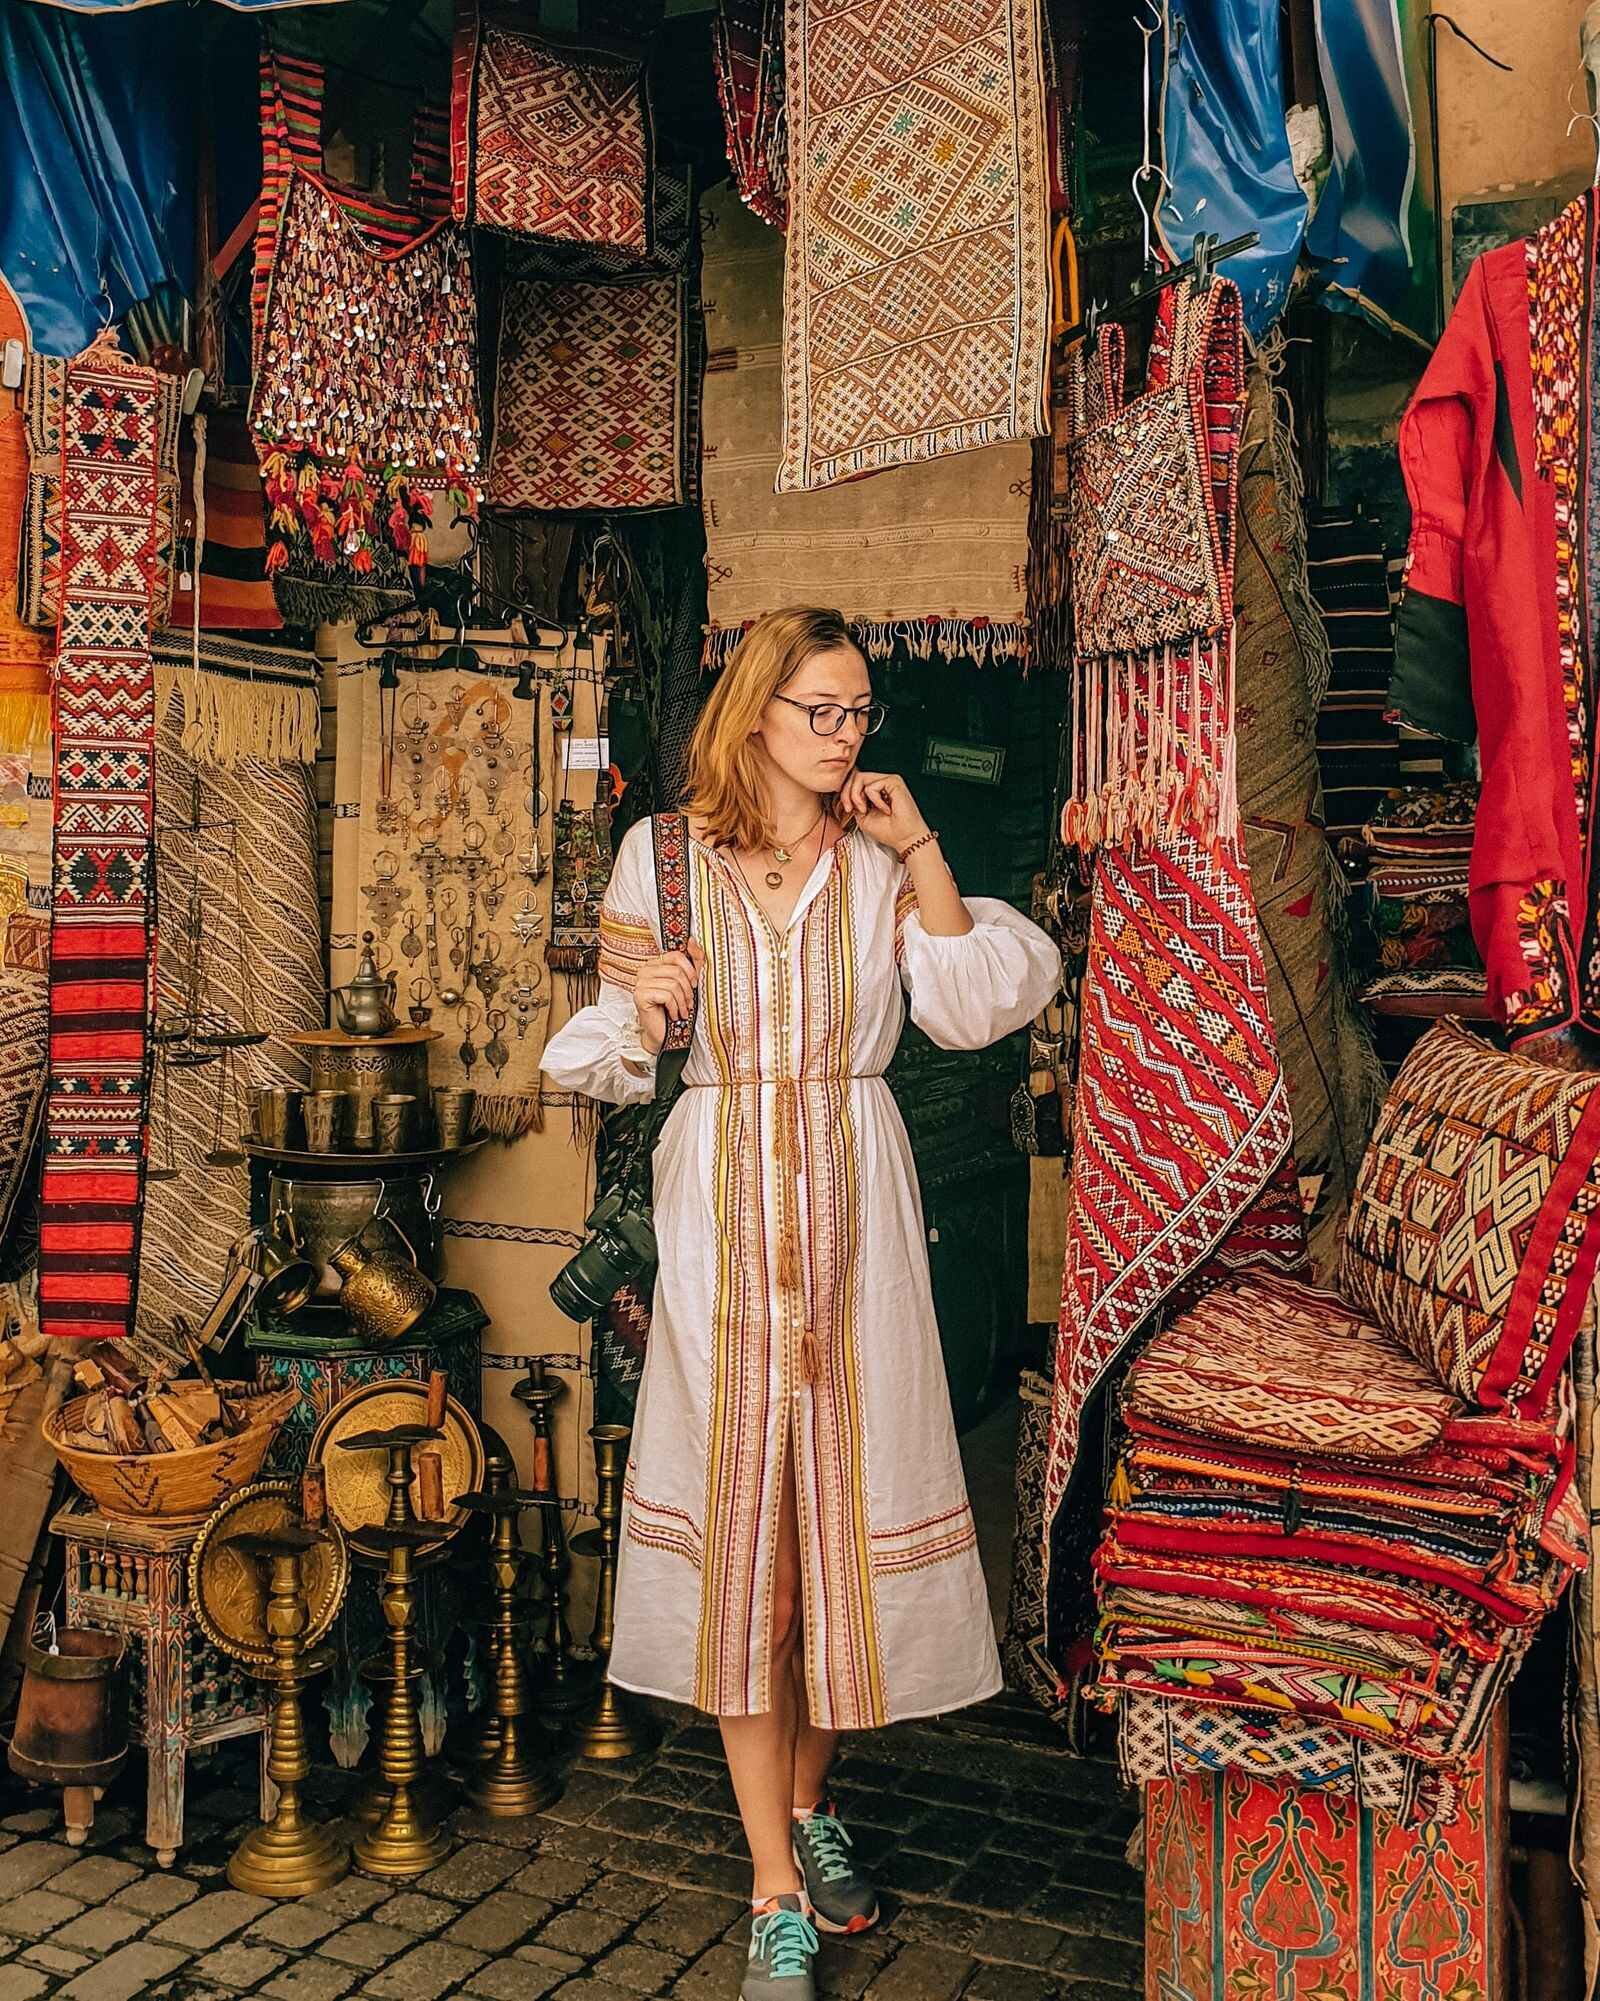 Helena standing in a souks shop surrounded by many patterned tapestries in Marrakesh medina